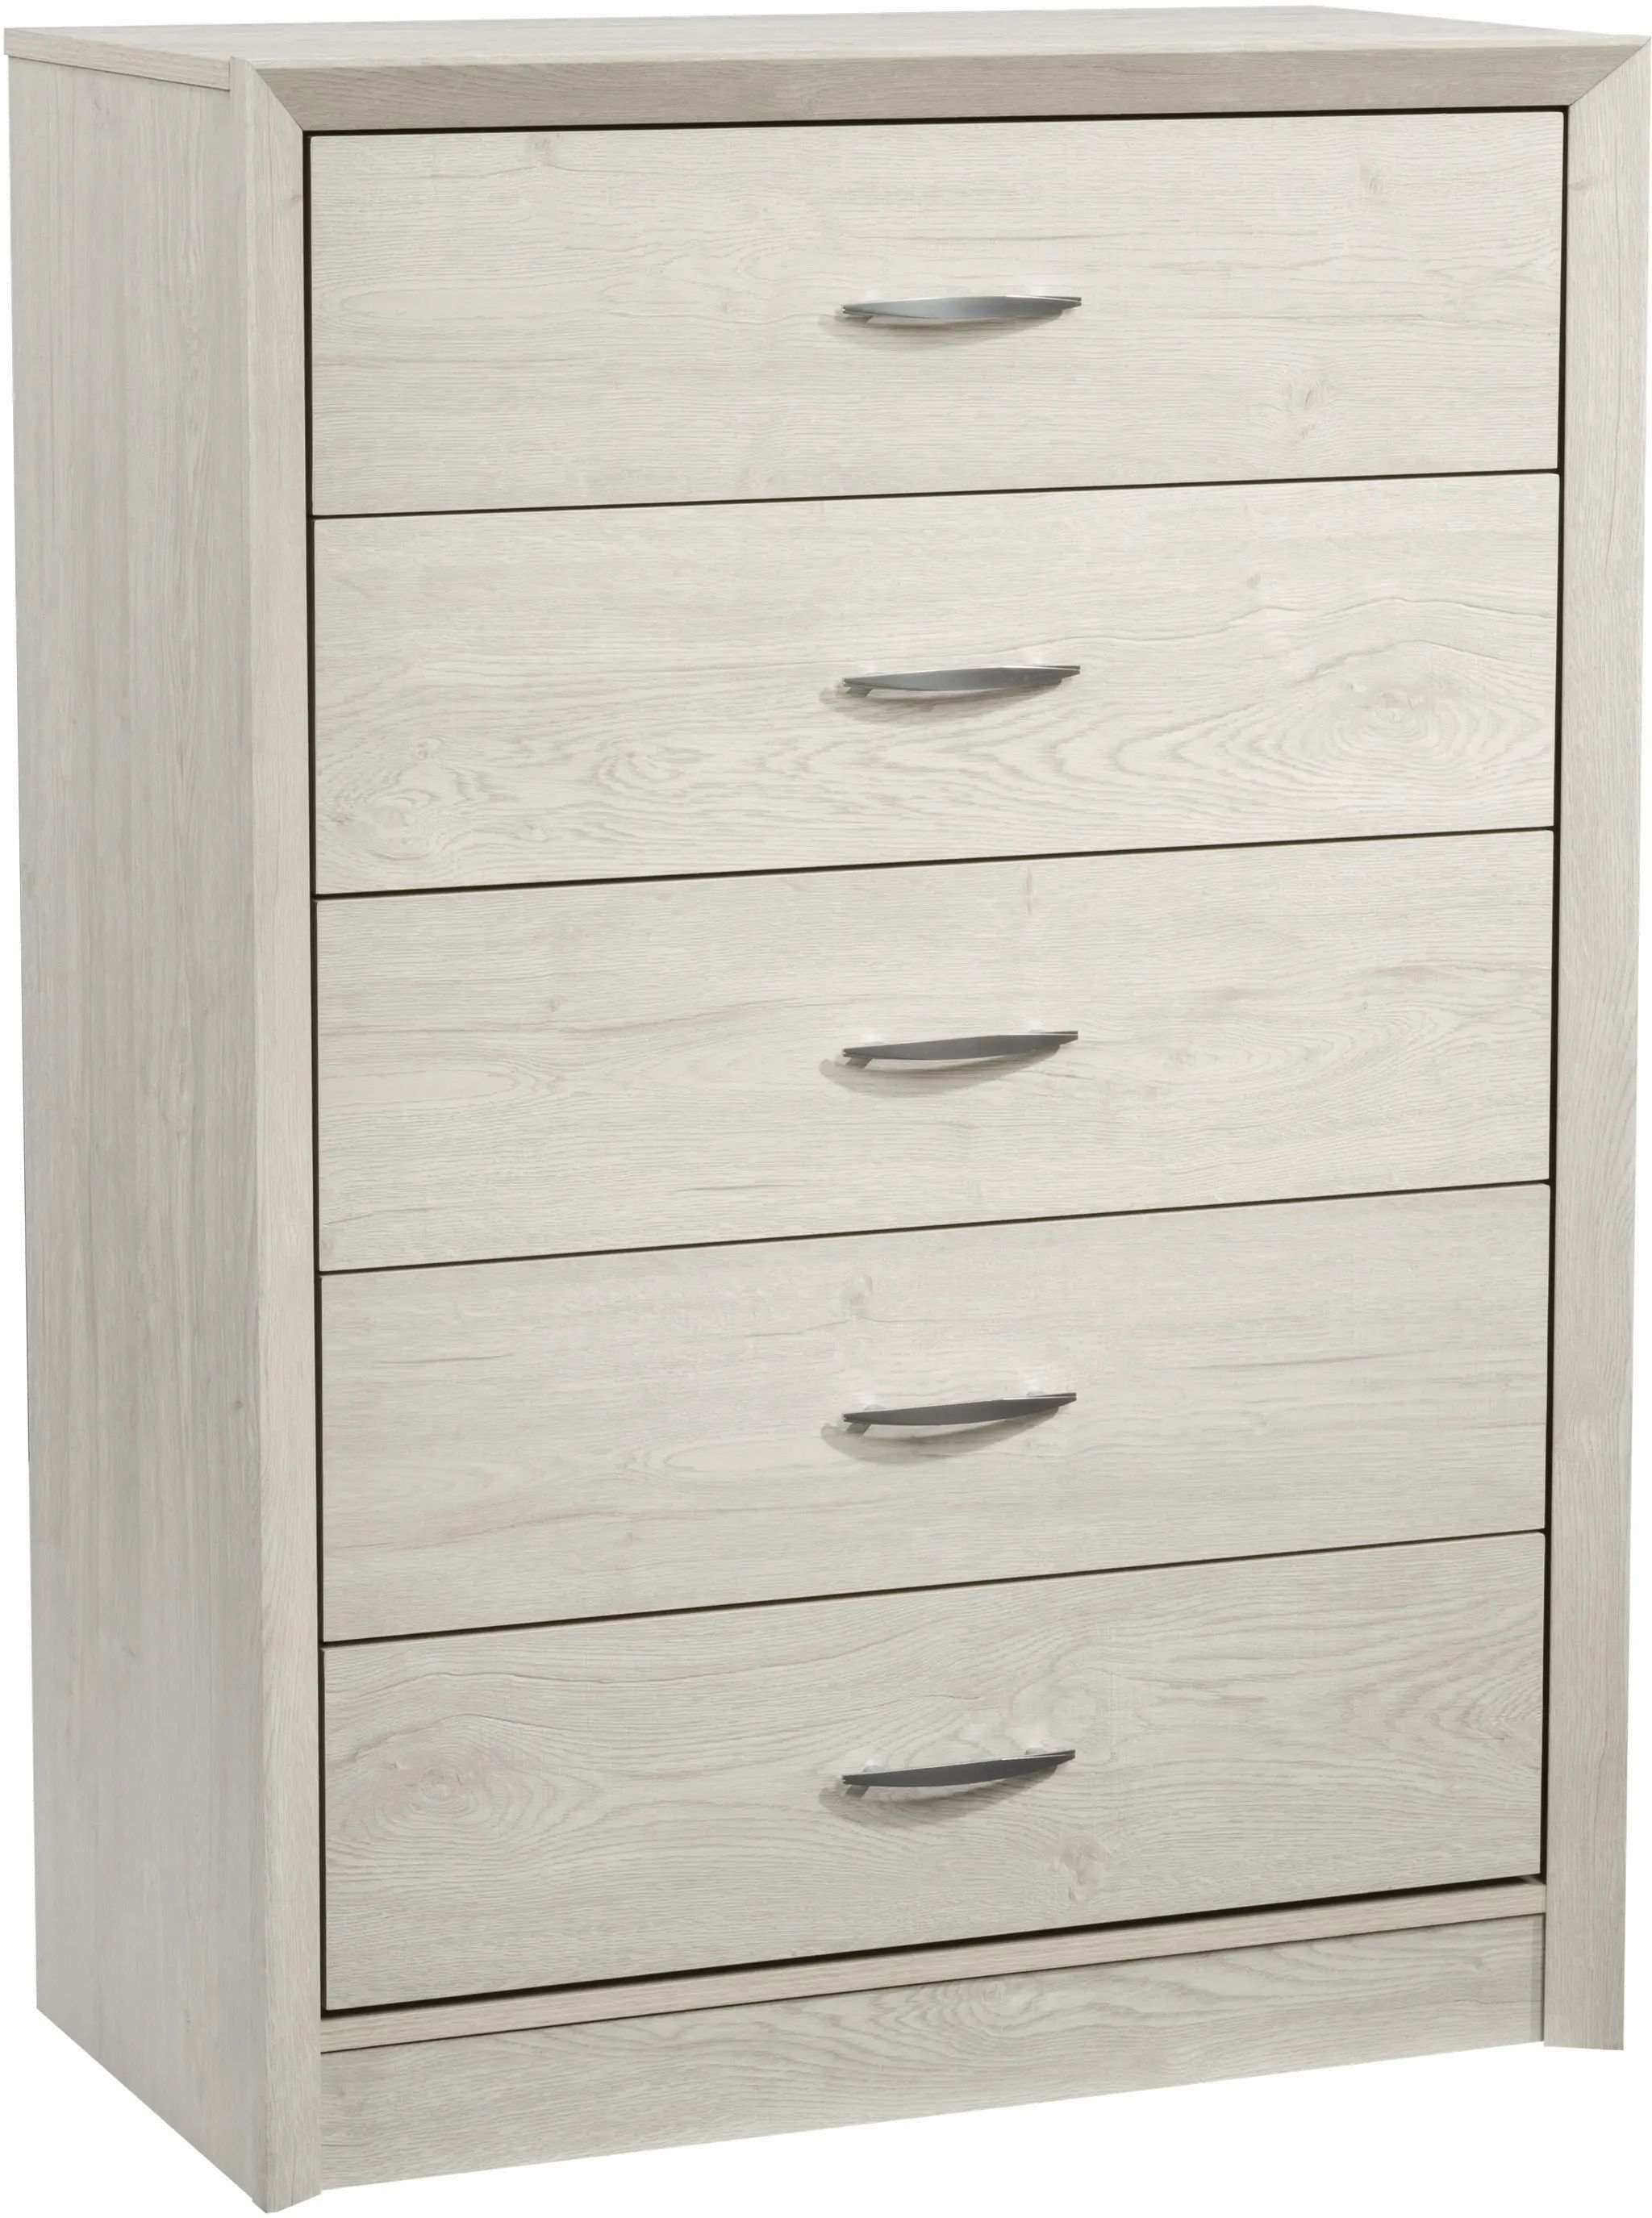 Photos - Dresser / Chests of Drawers CorLiving Newport Contemporary White Washed Oak Five Drawer Tall Dresser N 